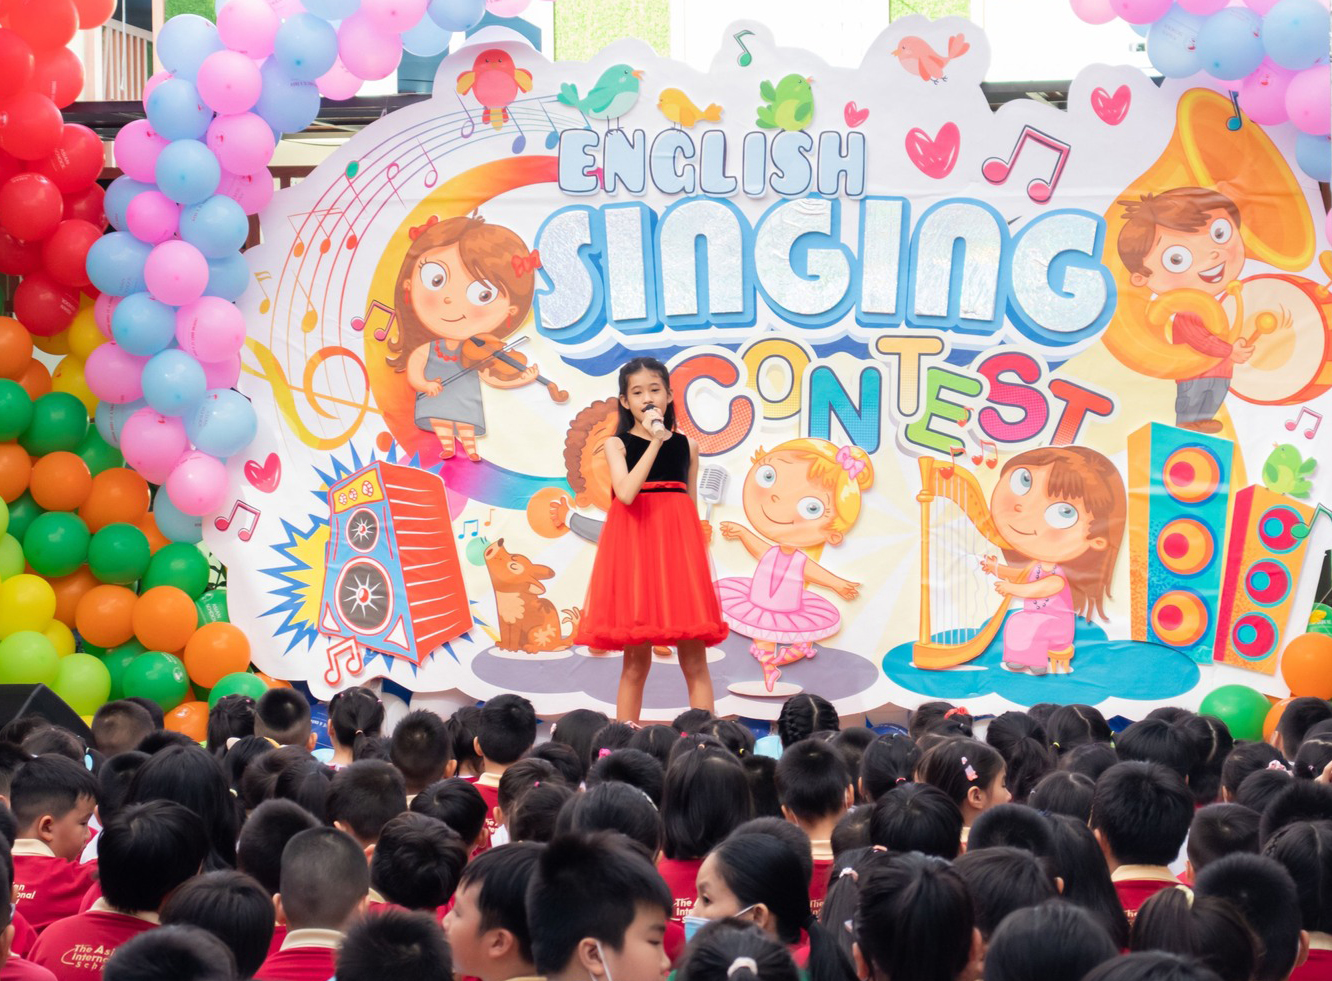 Kế Hoạch Thi Tiếng Hát Tiếng Anh English Singing Contest...<img src='/App_Themes/Default/Images/iconnew.gif' alt='' />